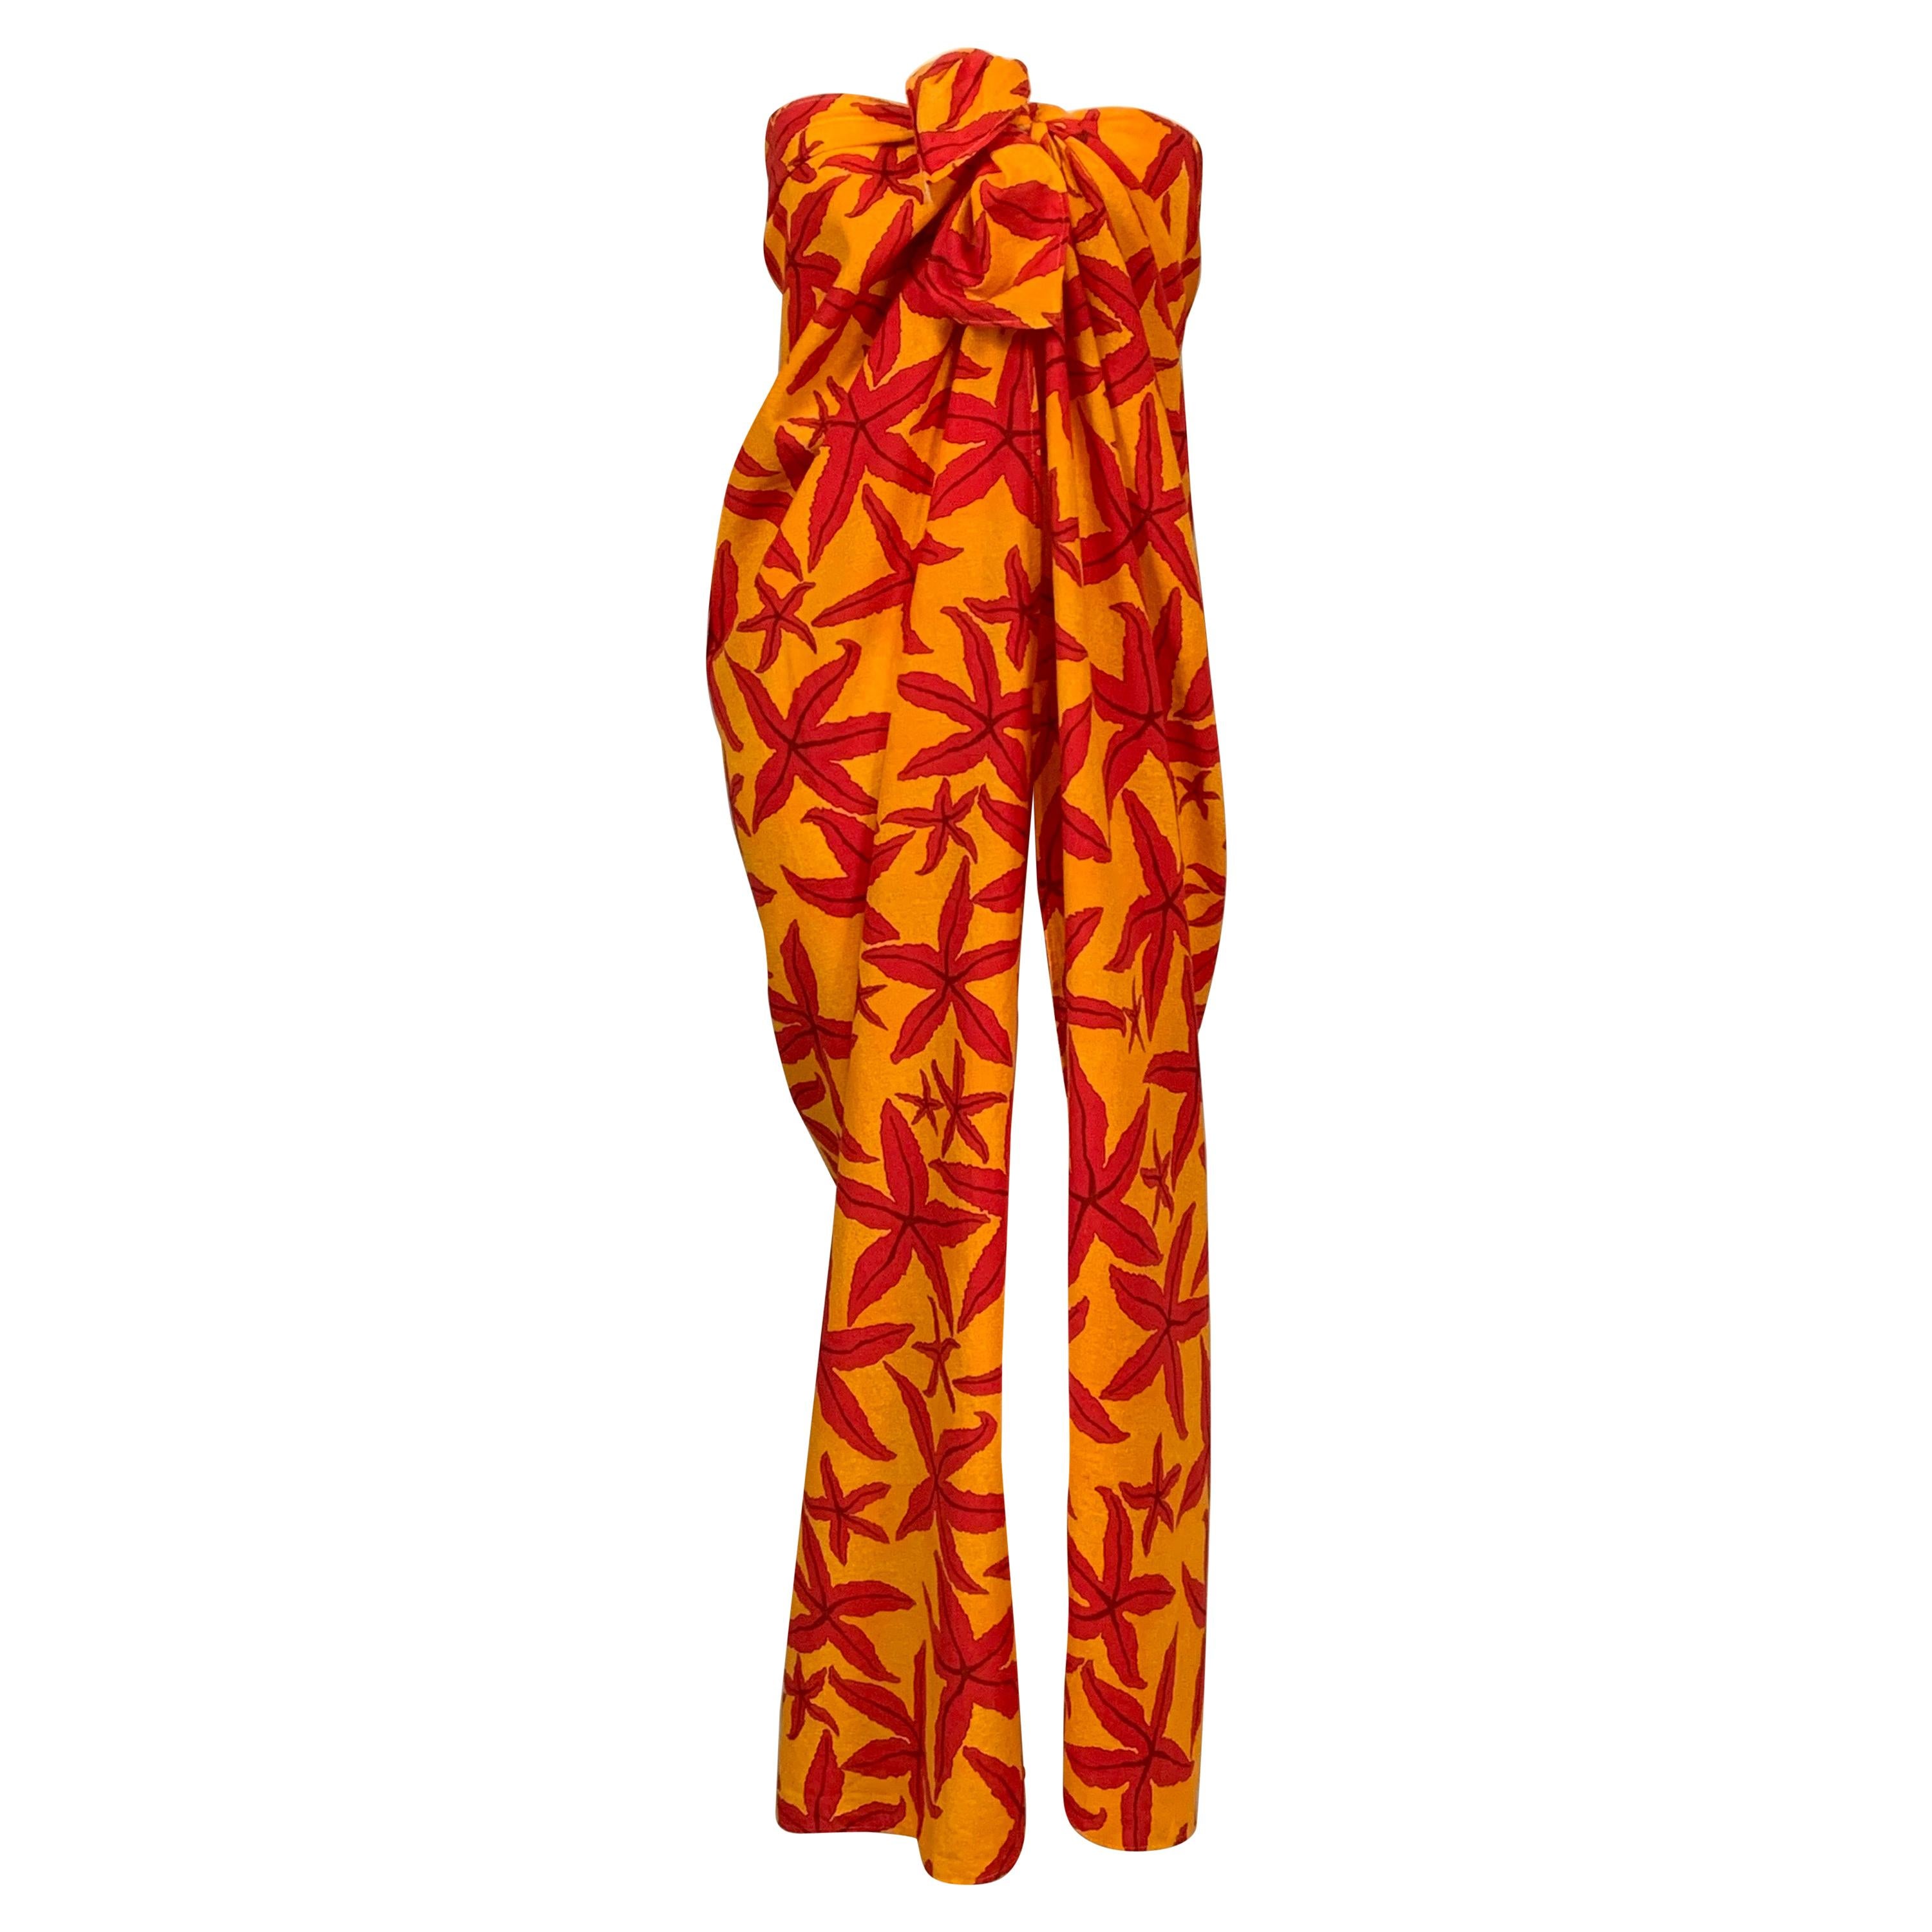 Hermes, Paris Tropical Starfish Patterned Red and Yellow Pareo, Wrap or Shawl